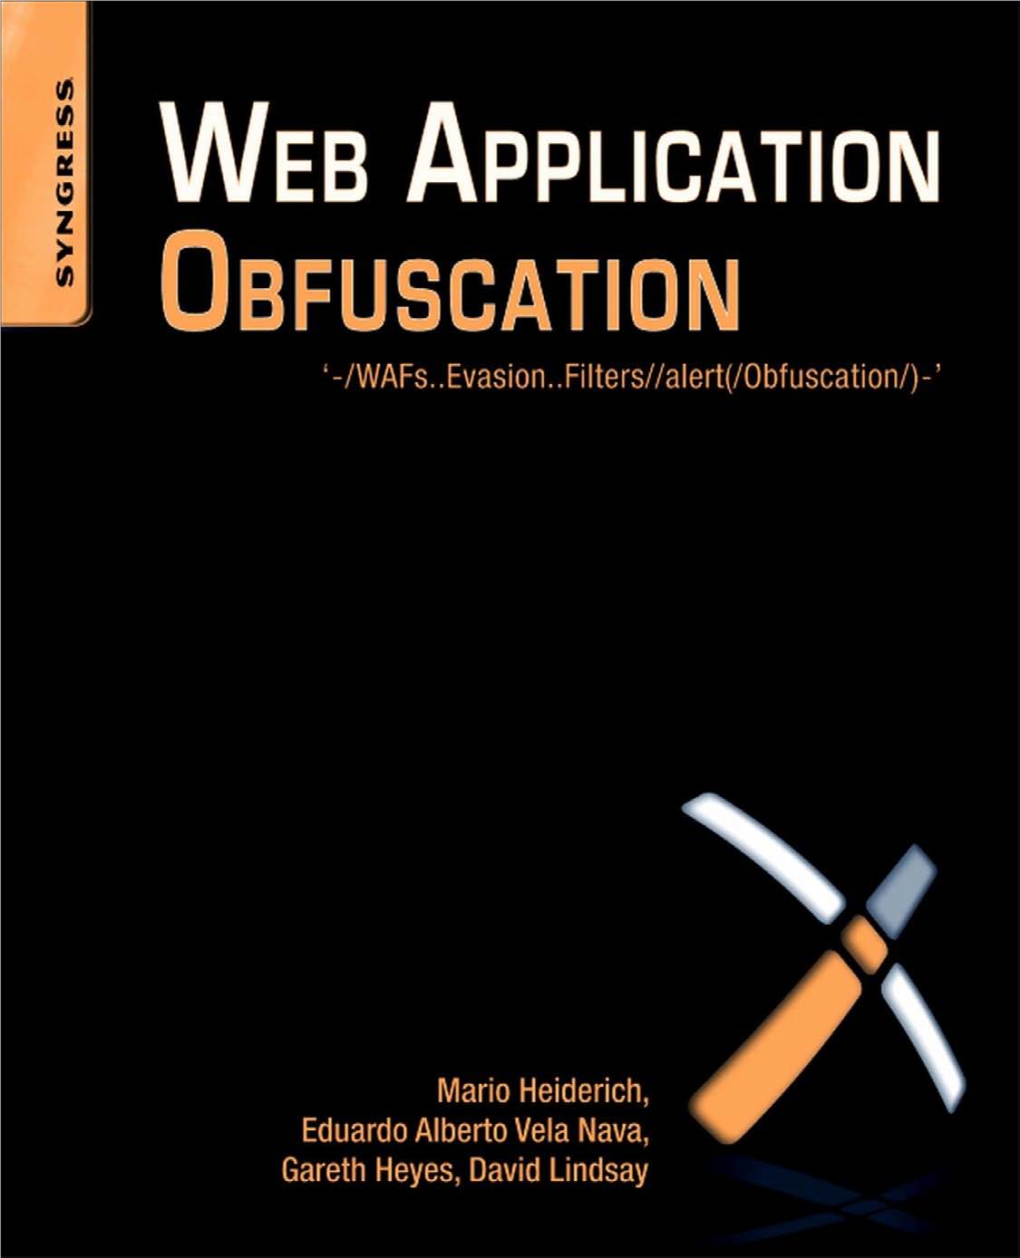 Web Application Obfuscation This Page Intentionally Left Blank Web Application Obfuscation ‘-/Wafs..Evasion..Filters//Alert (/Obfuscation/)-’